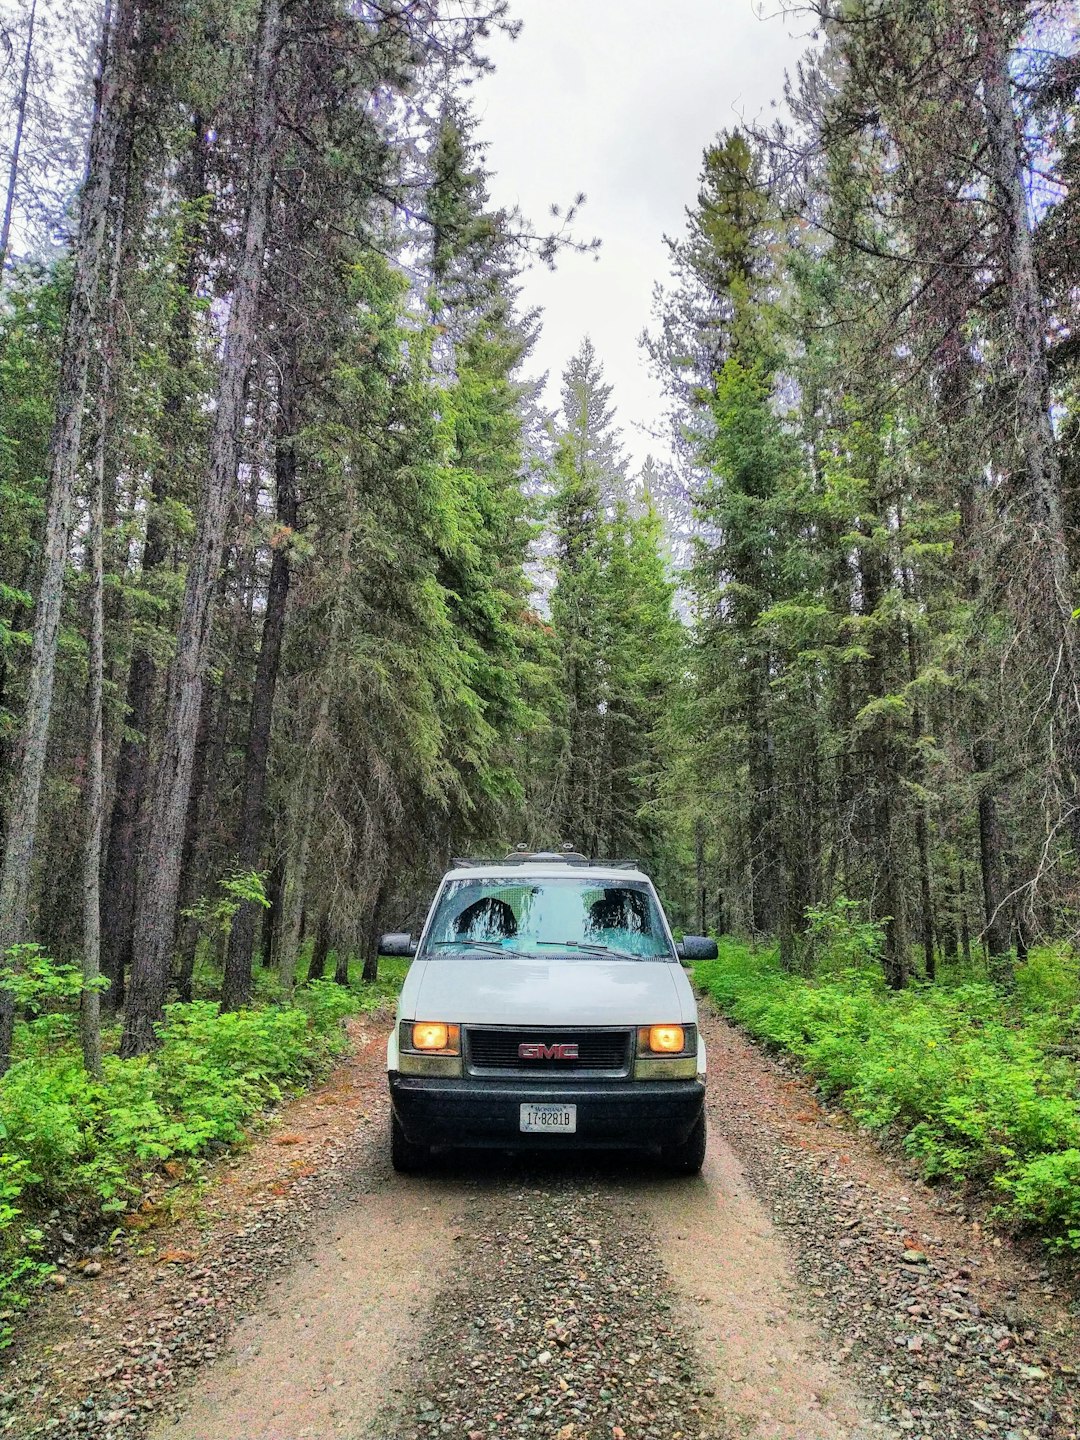 Snapped this picture of the Adventure Van as I was coming out of the camp spot at the top of west glacier park in Montana, It was a rainy morning and a perfect morning journey into the pole bridge mercantile for coffee.